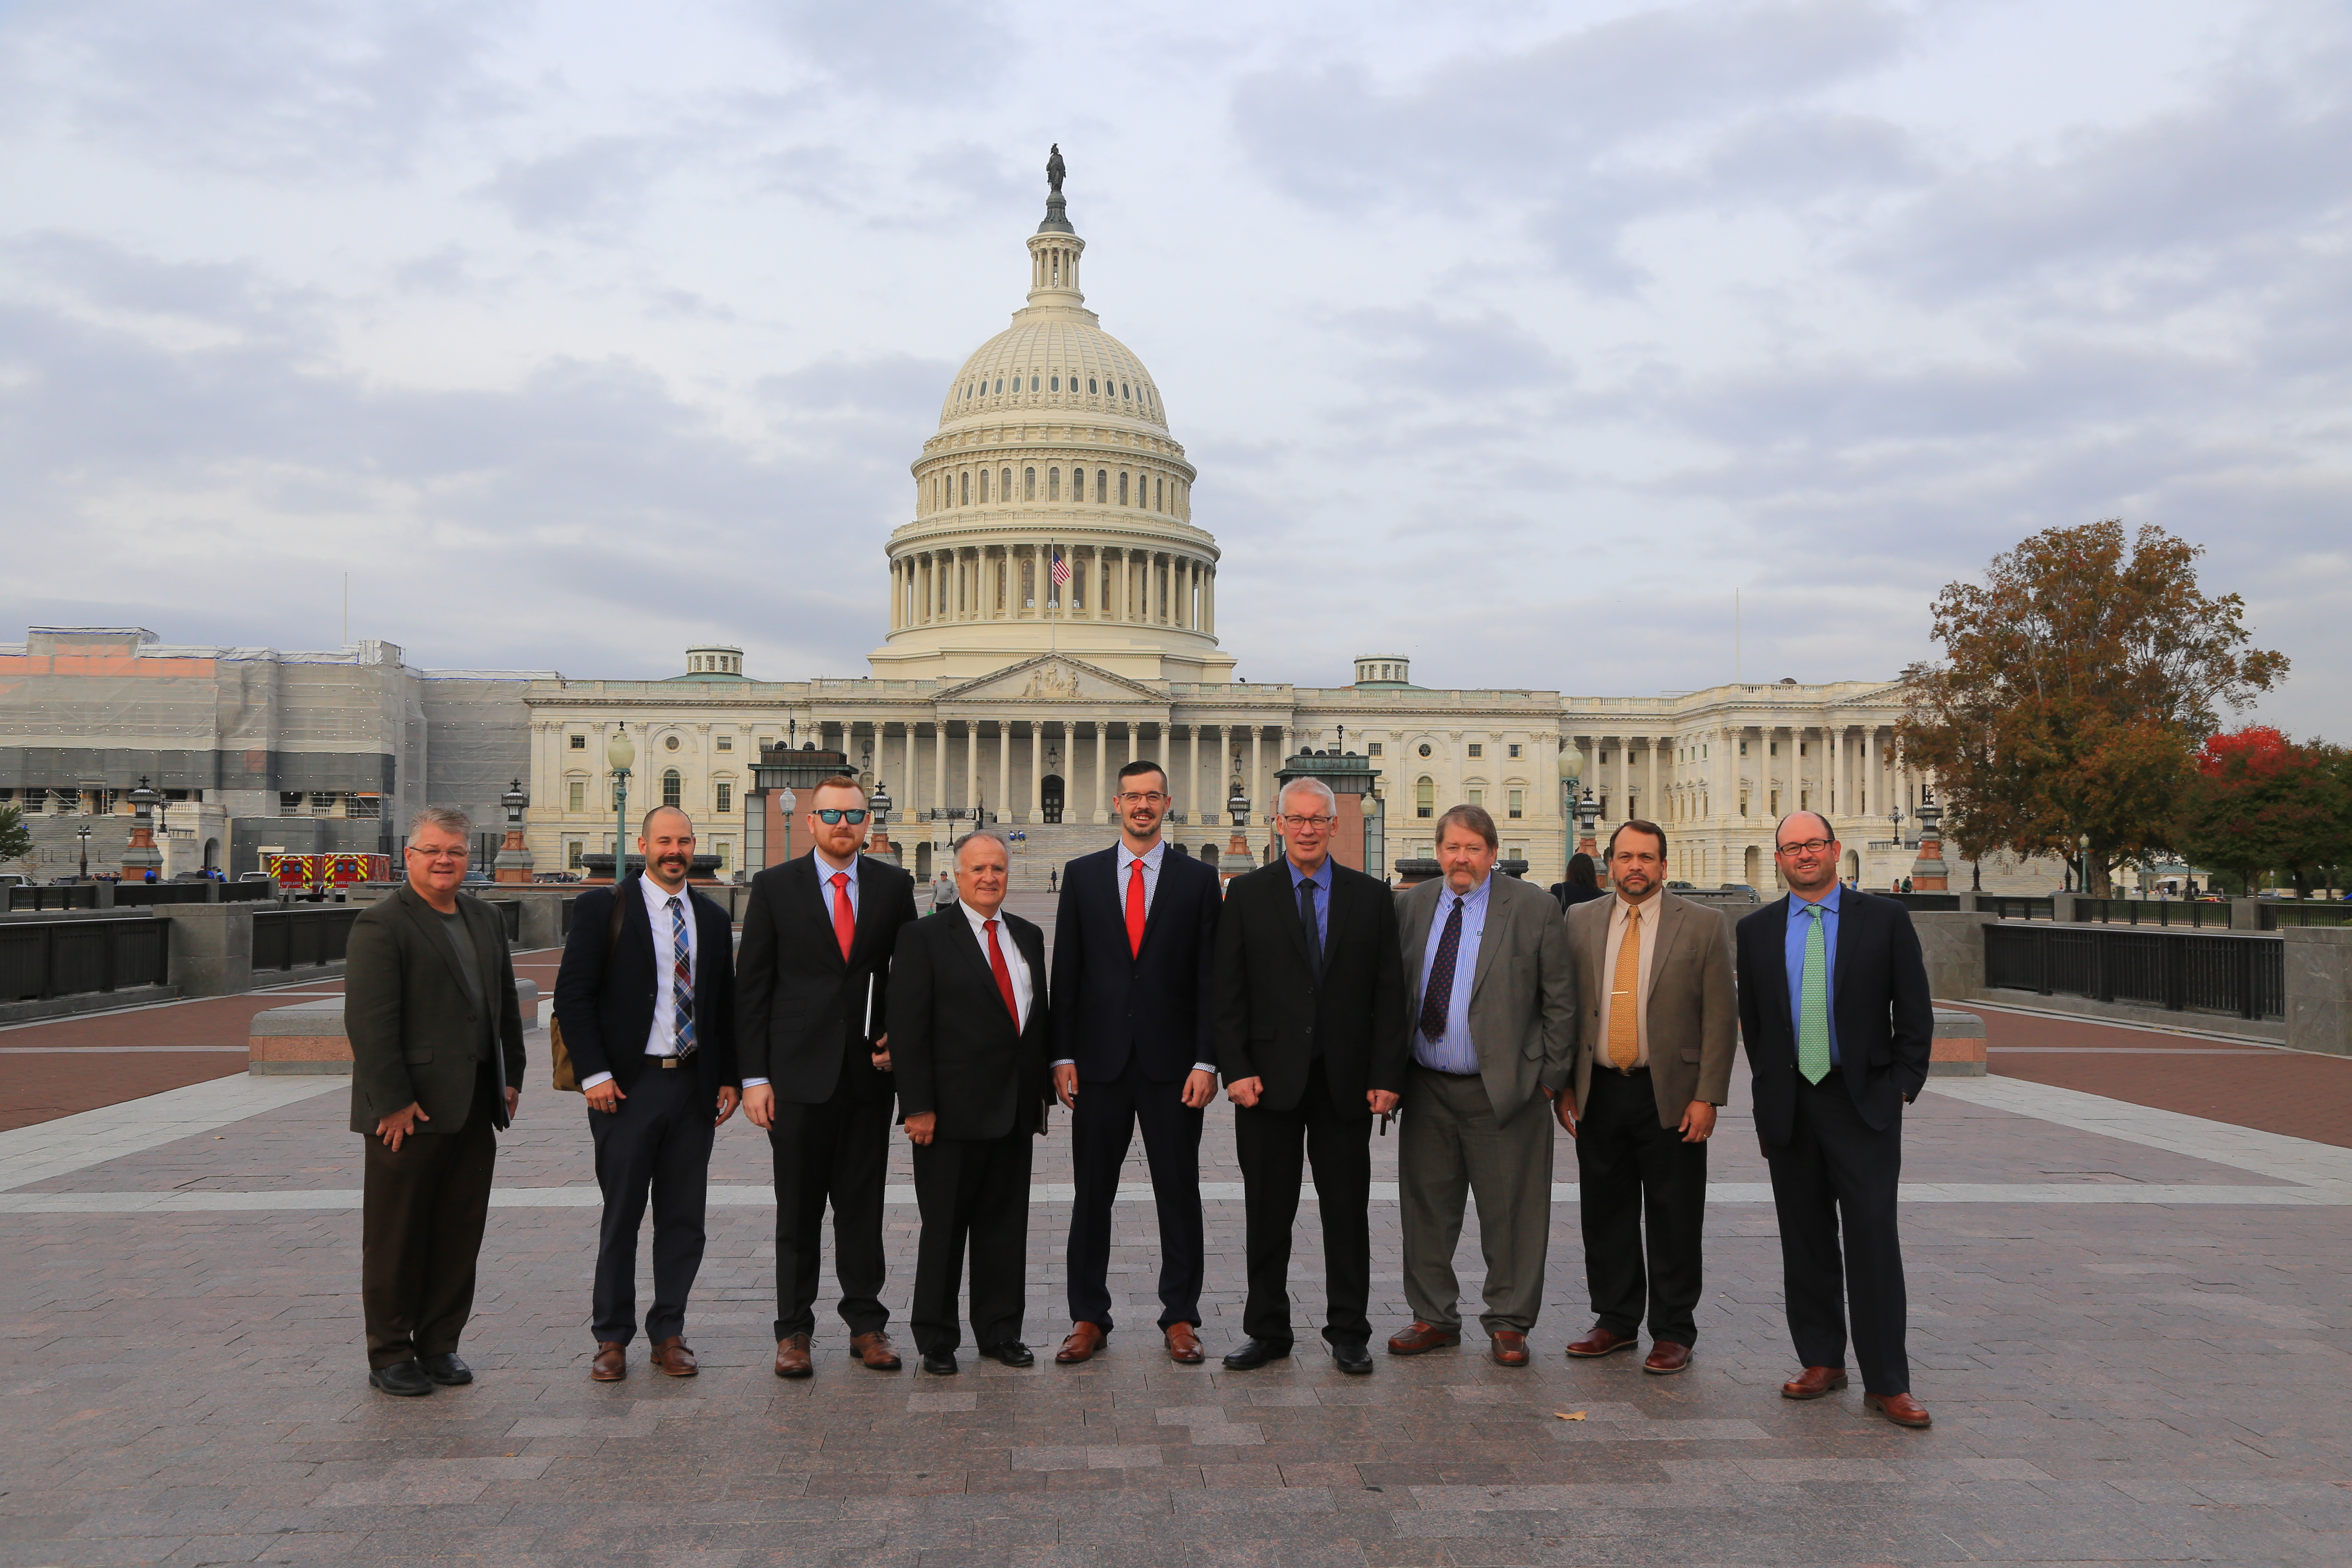 Tim Portz and others during the PFI Fly-in in Washington D.C.